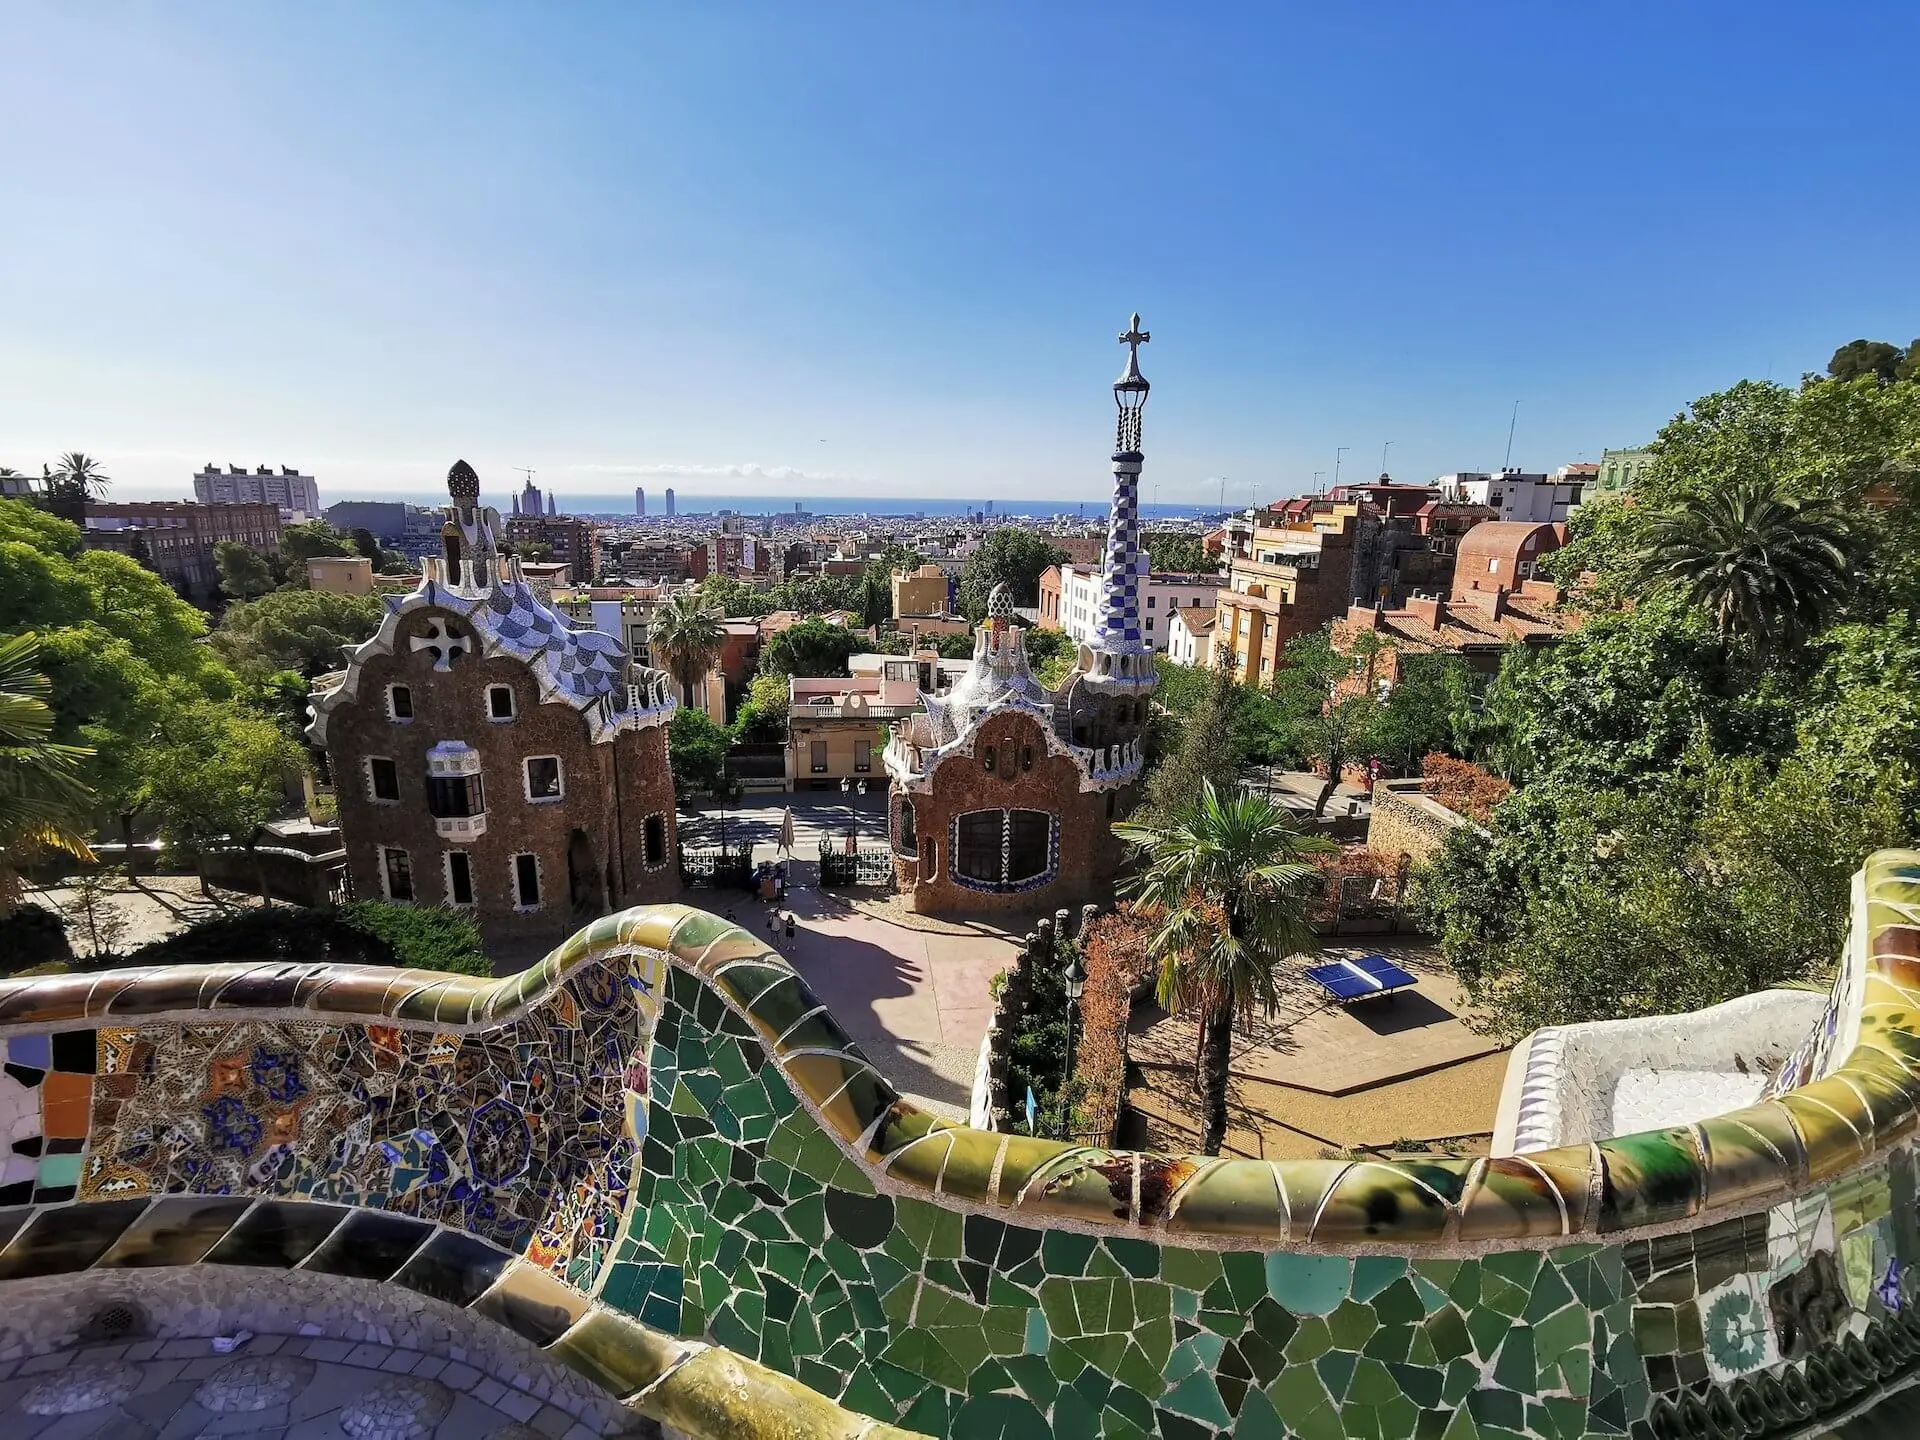 Mosaic-covered walls, typical of Park Güell.